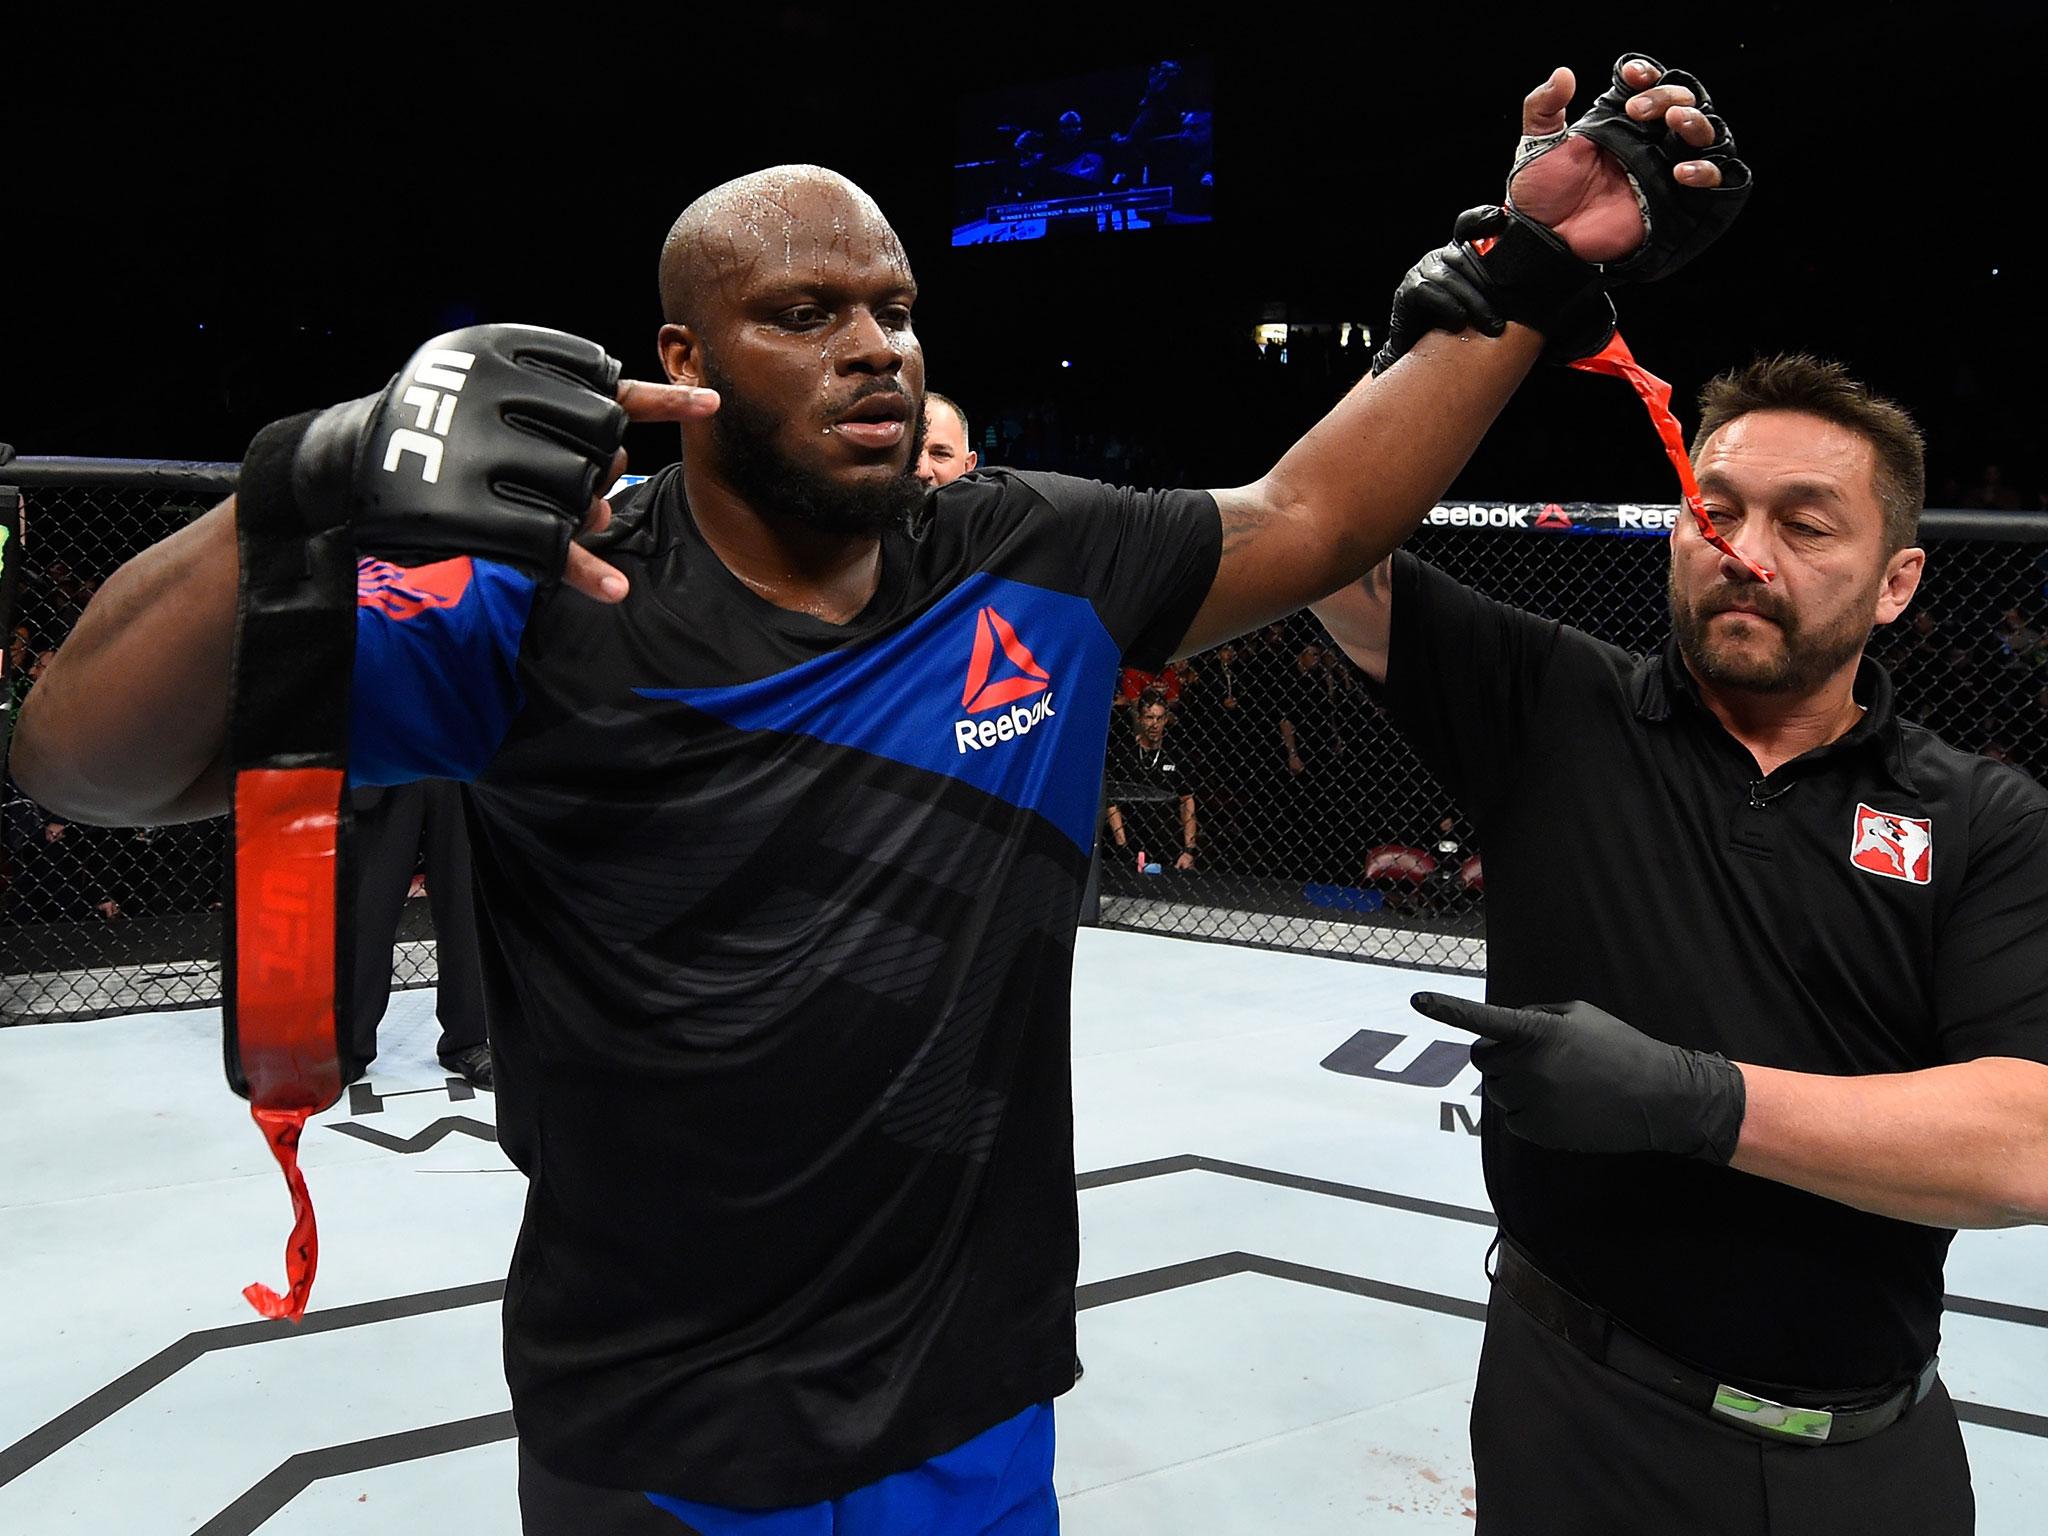 Derrick Lewis celebrates his victory over Travis Browne at UFC Fight Night 105